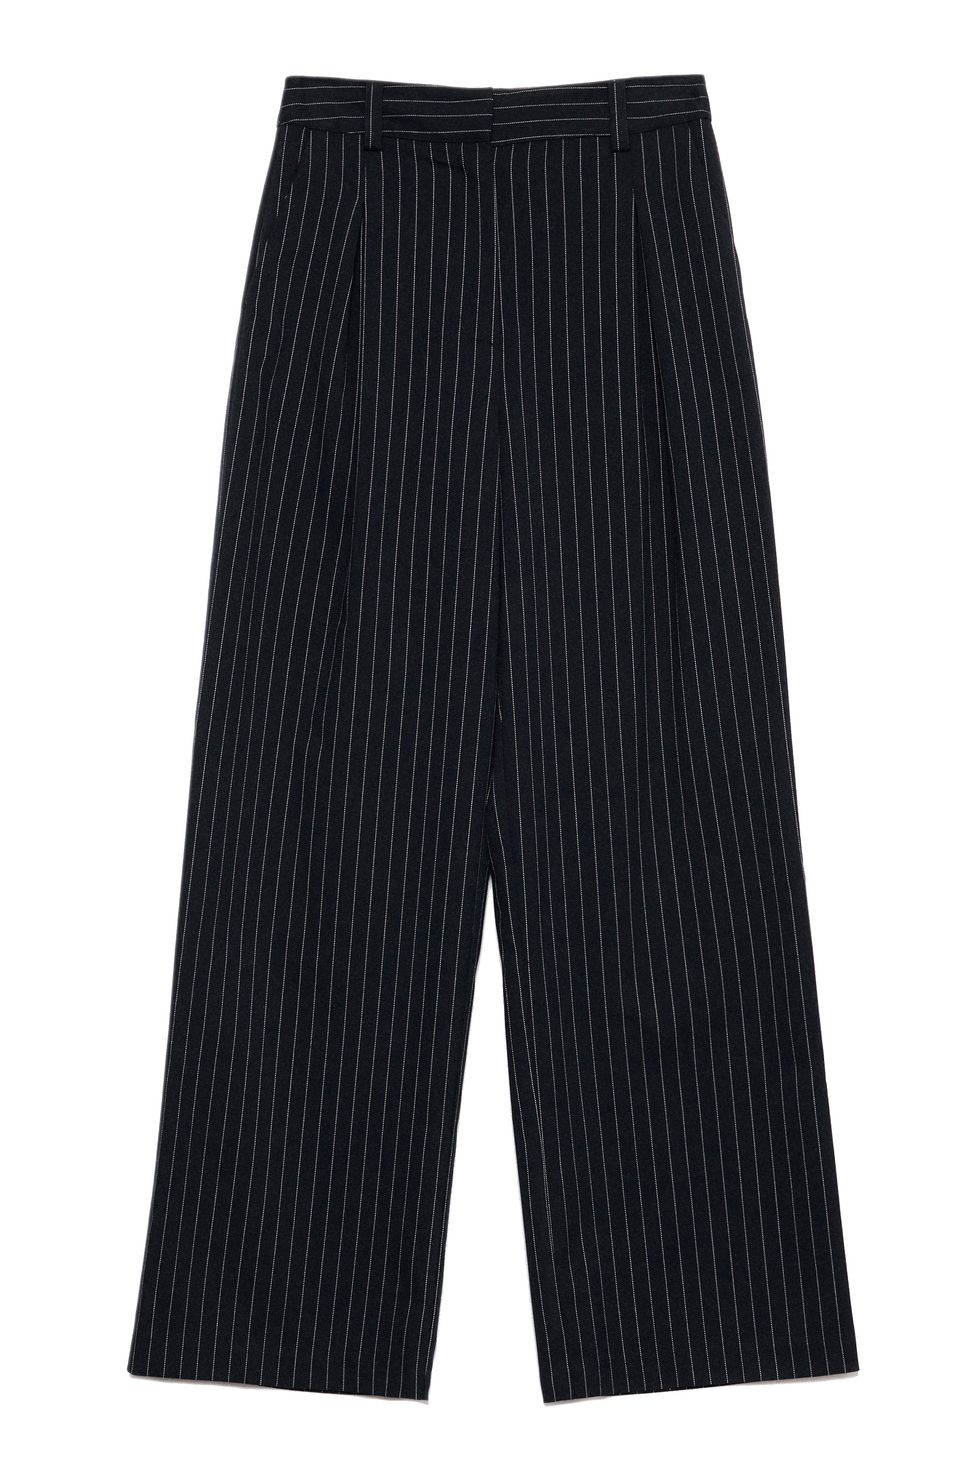 Pinstripe trousers are the tailoring trend you need for spring